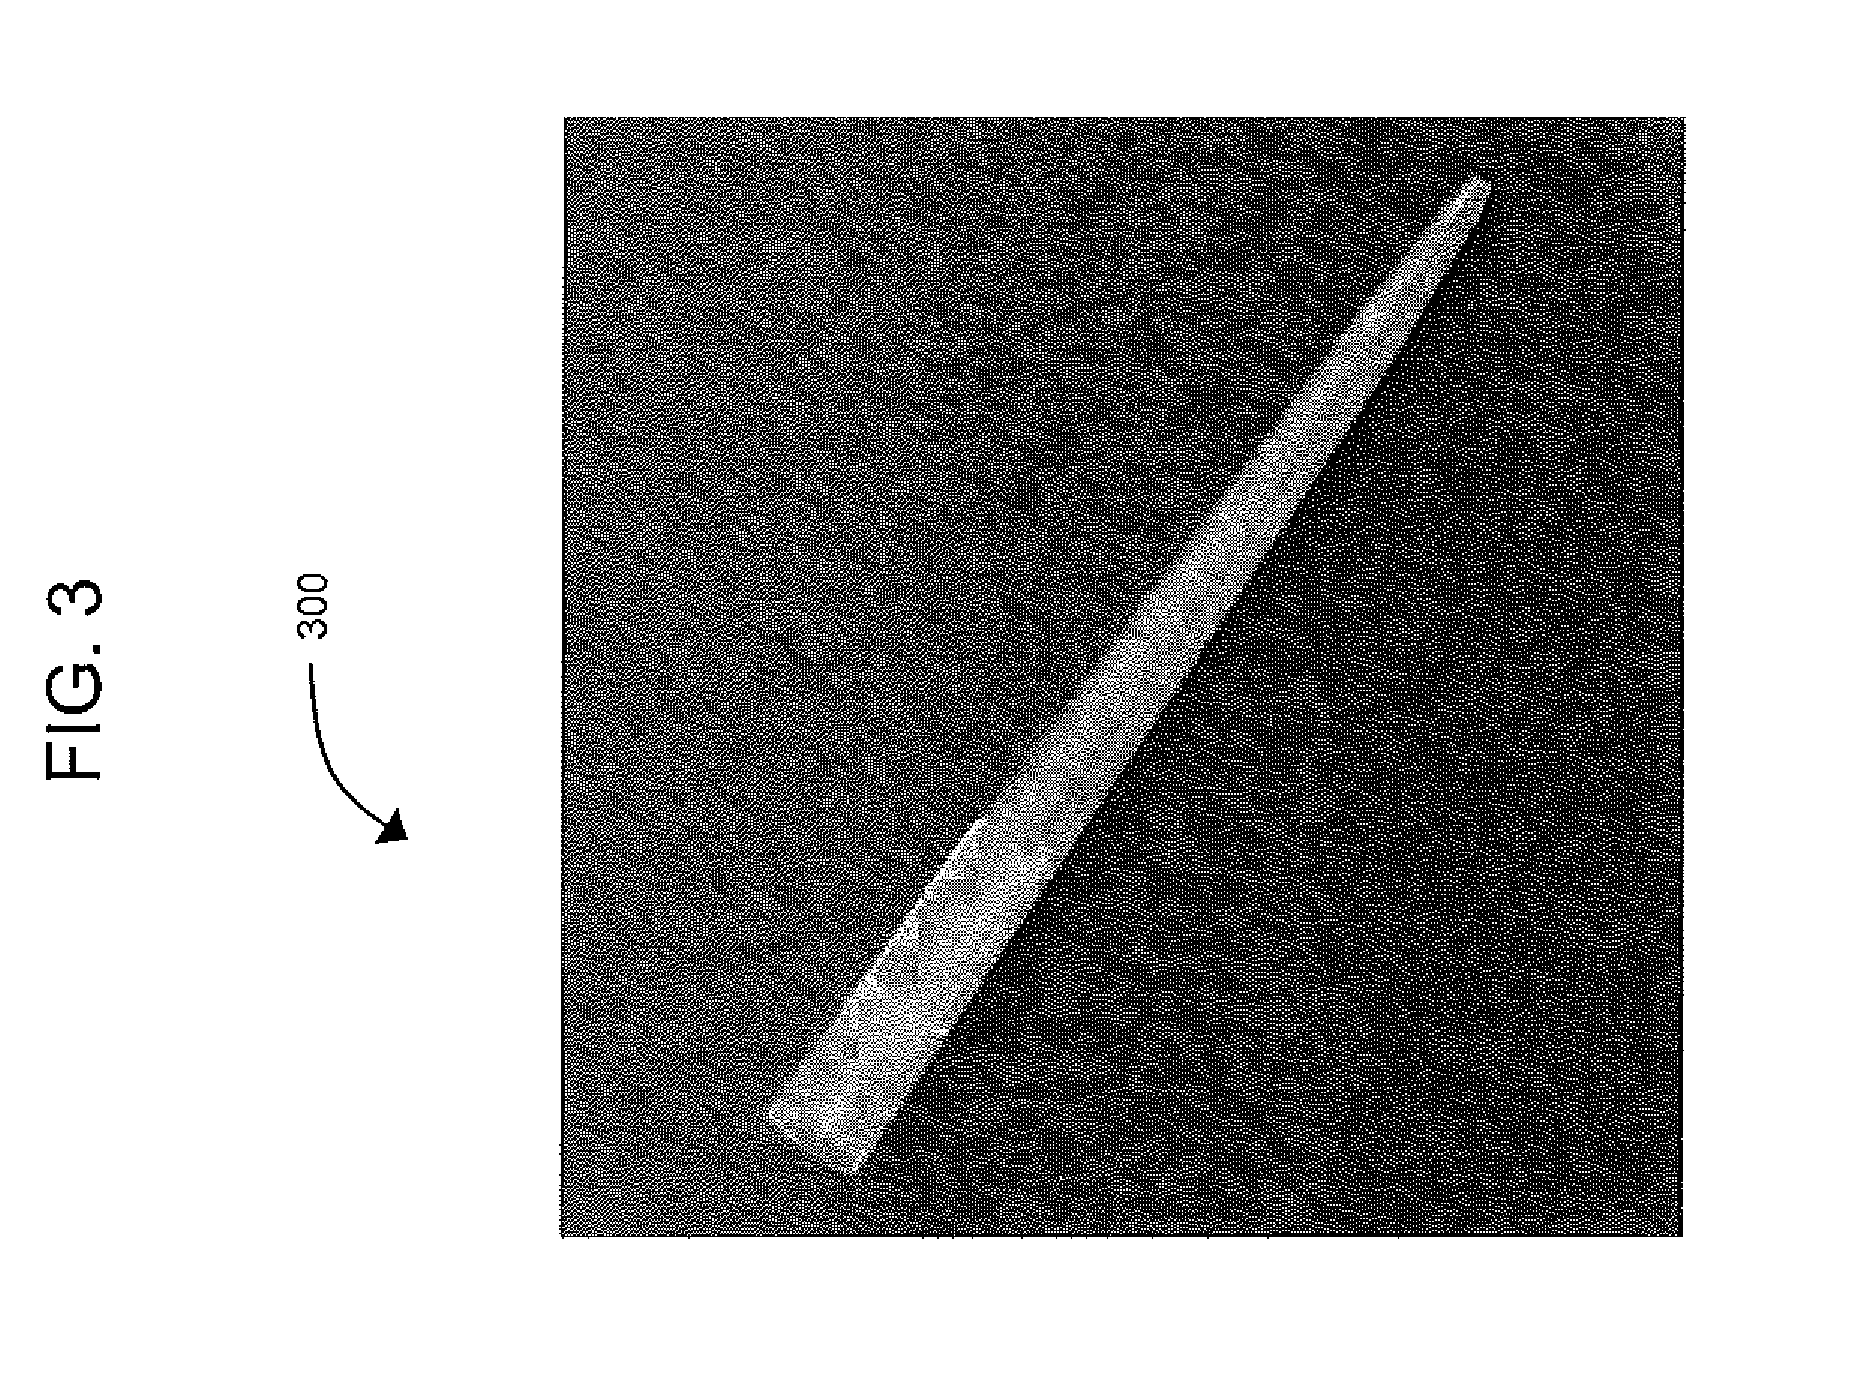 Method and apparatus for identification of bacteria